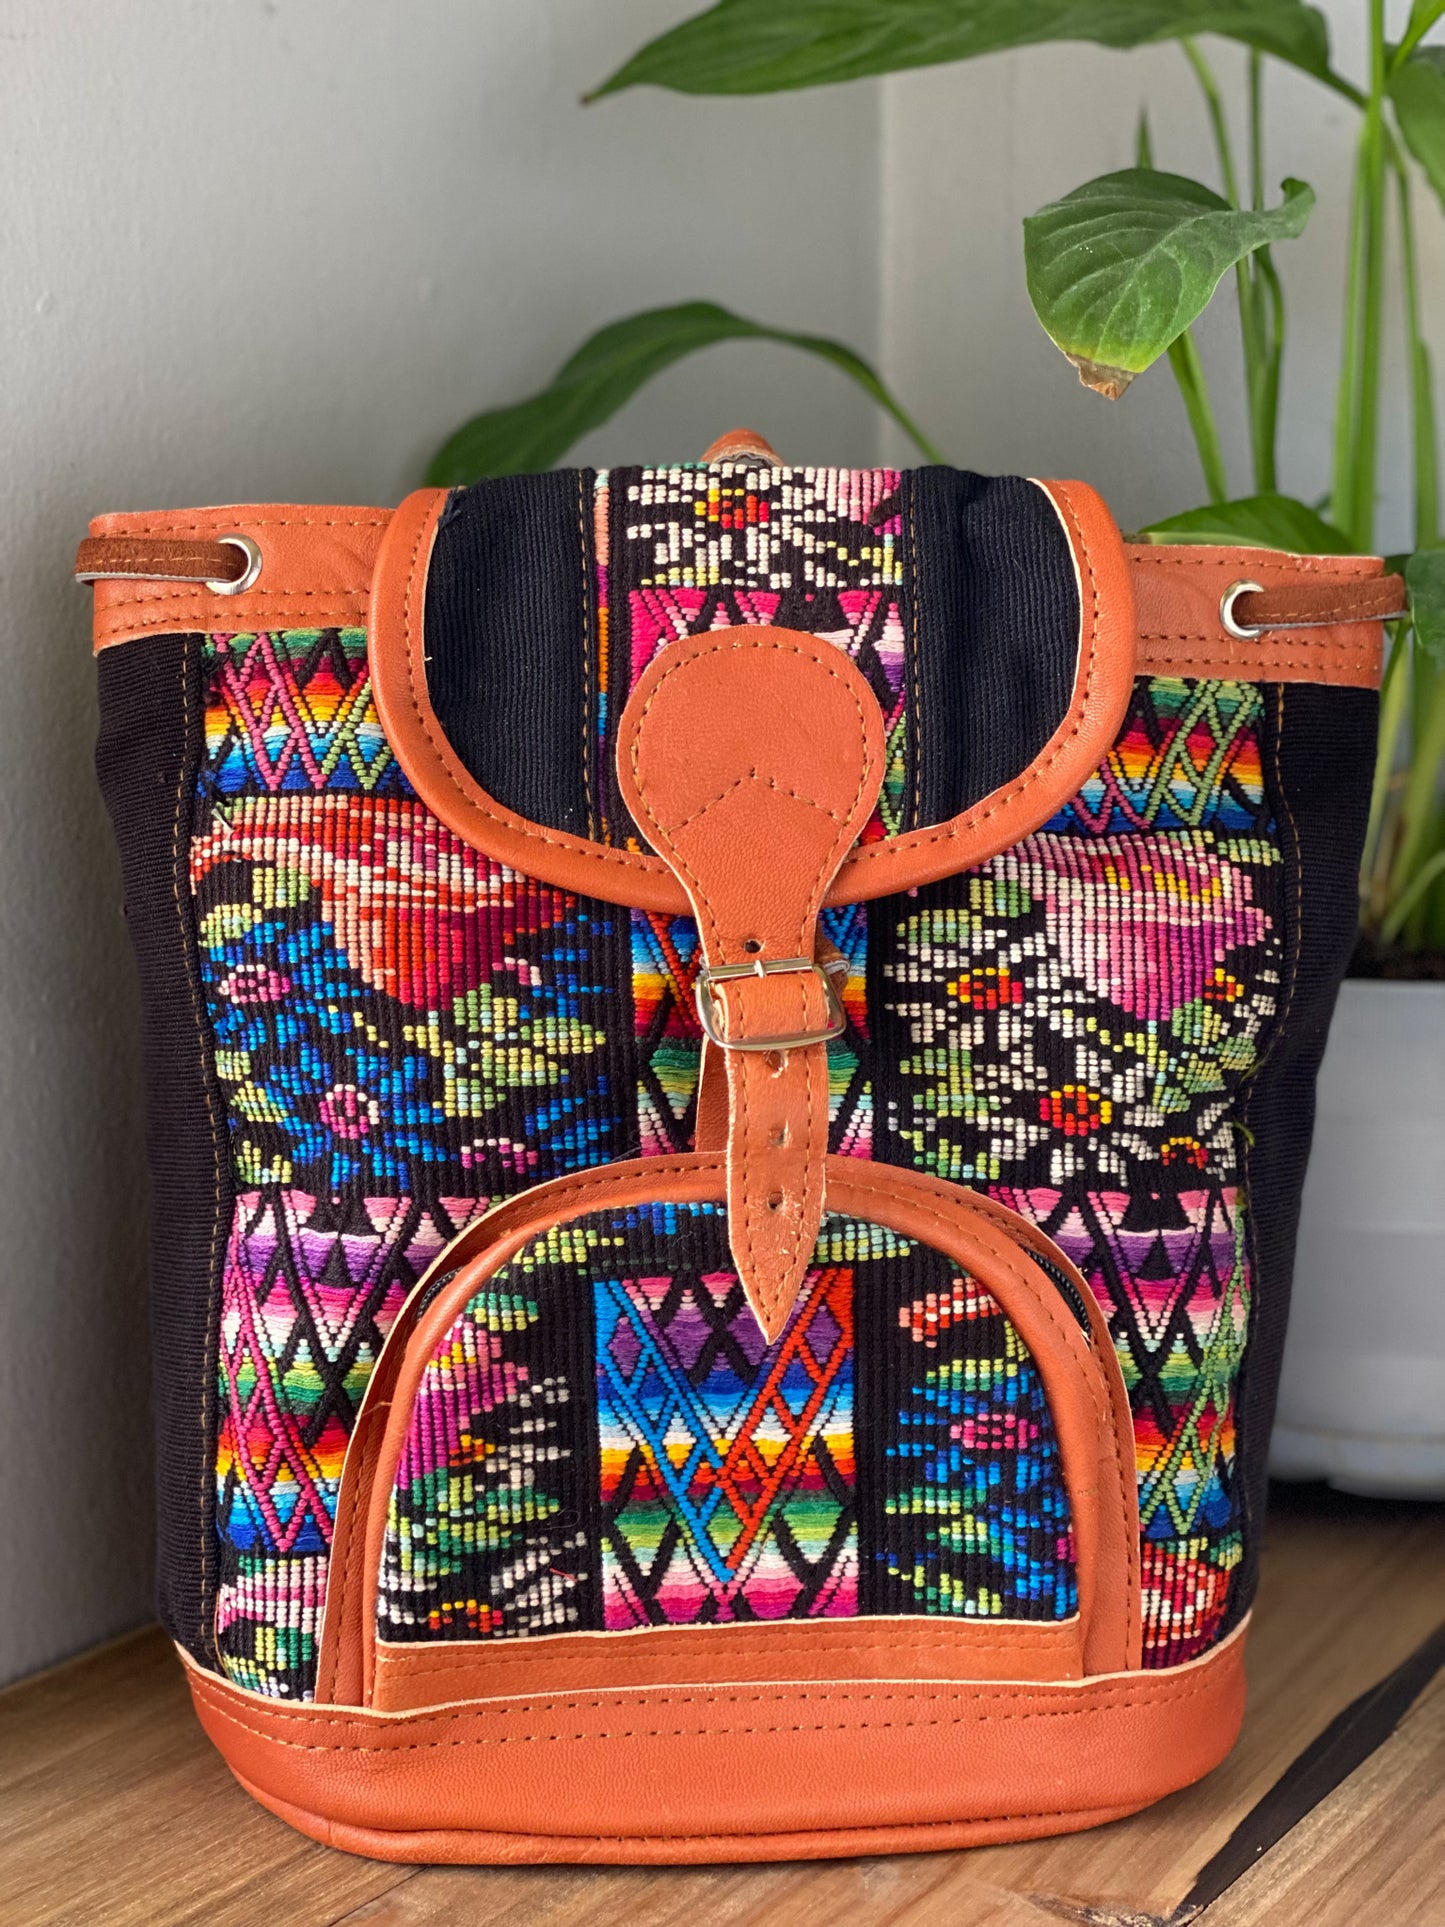 MIni leather huipil backpack hand woven with colorful embroidery and adjustable leather straps with front belt buckle closure and front zipper pocket perfect for hiking or beach trip handmade in Guatemala